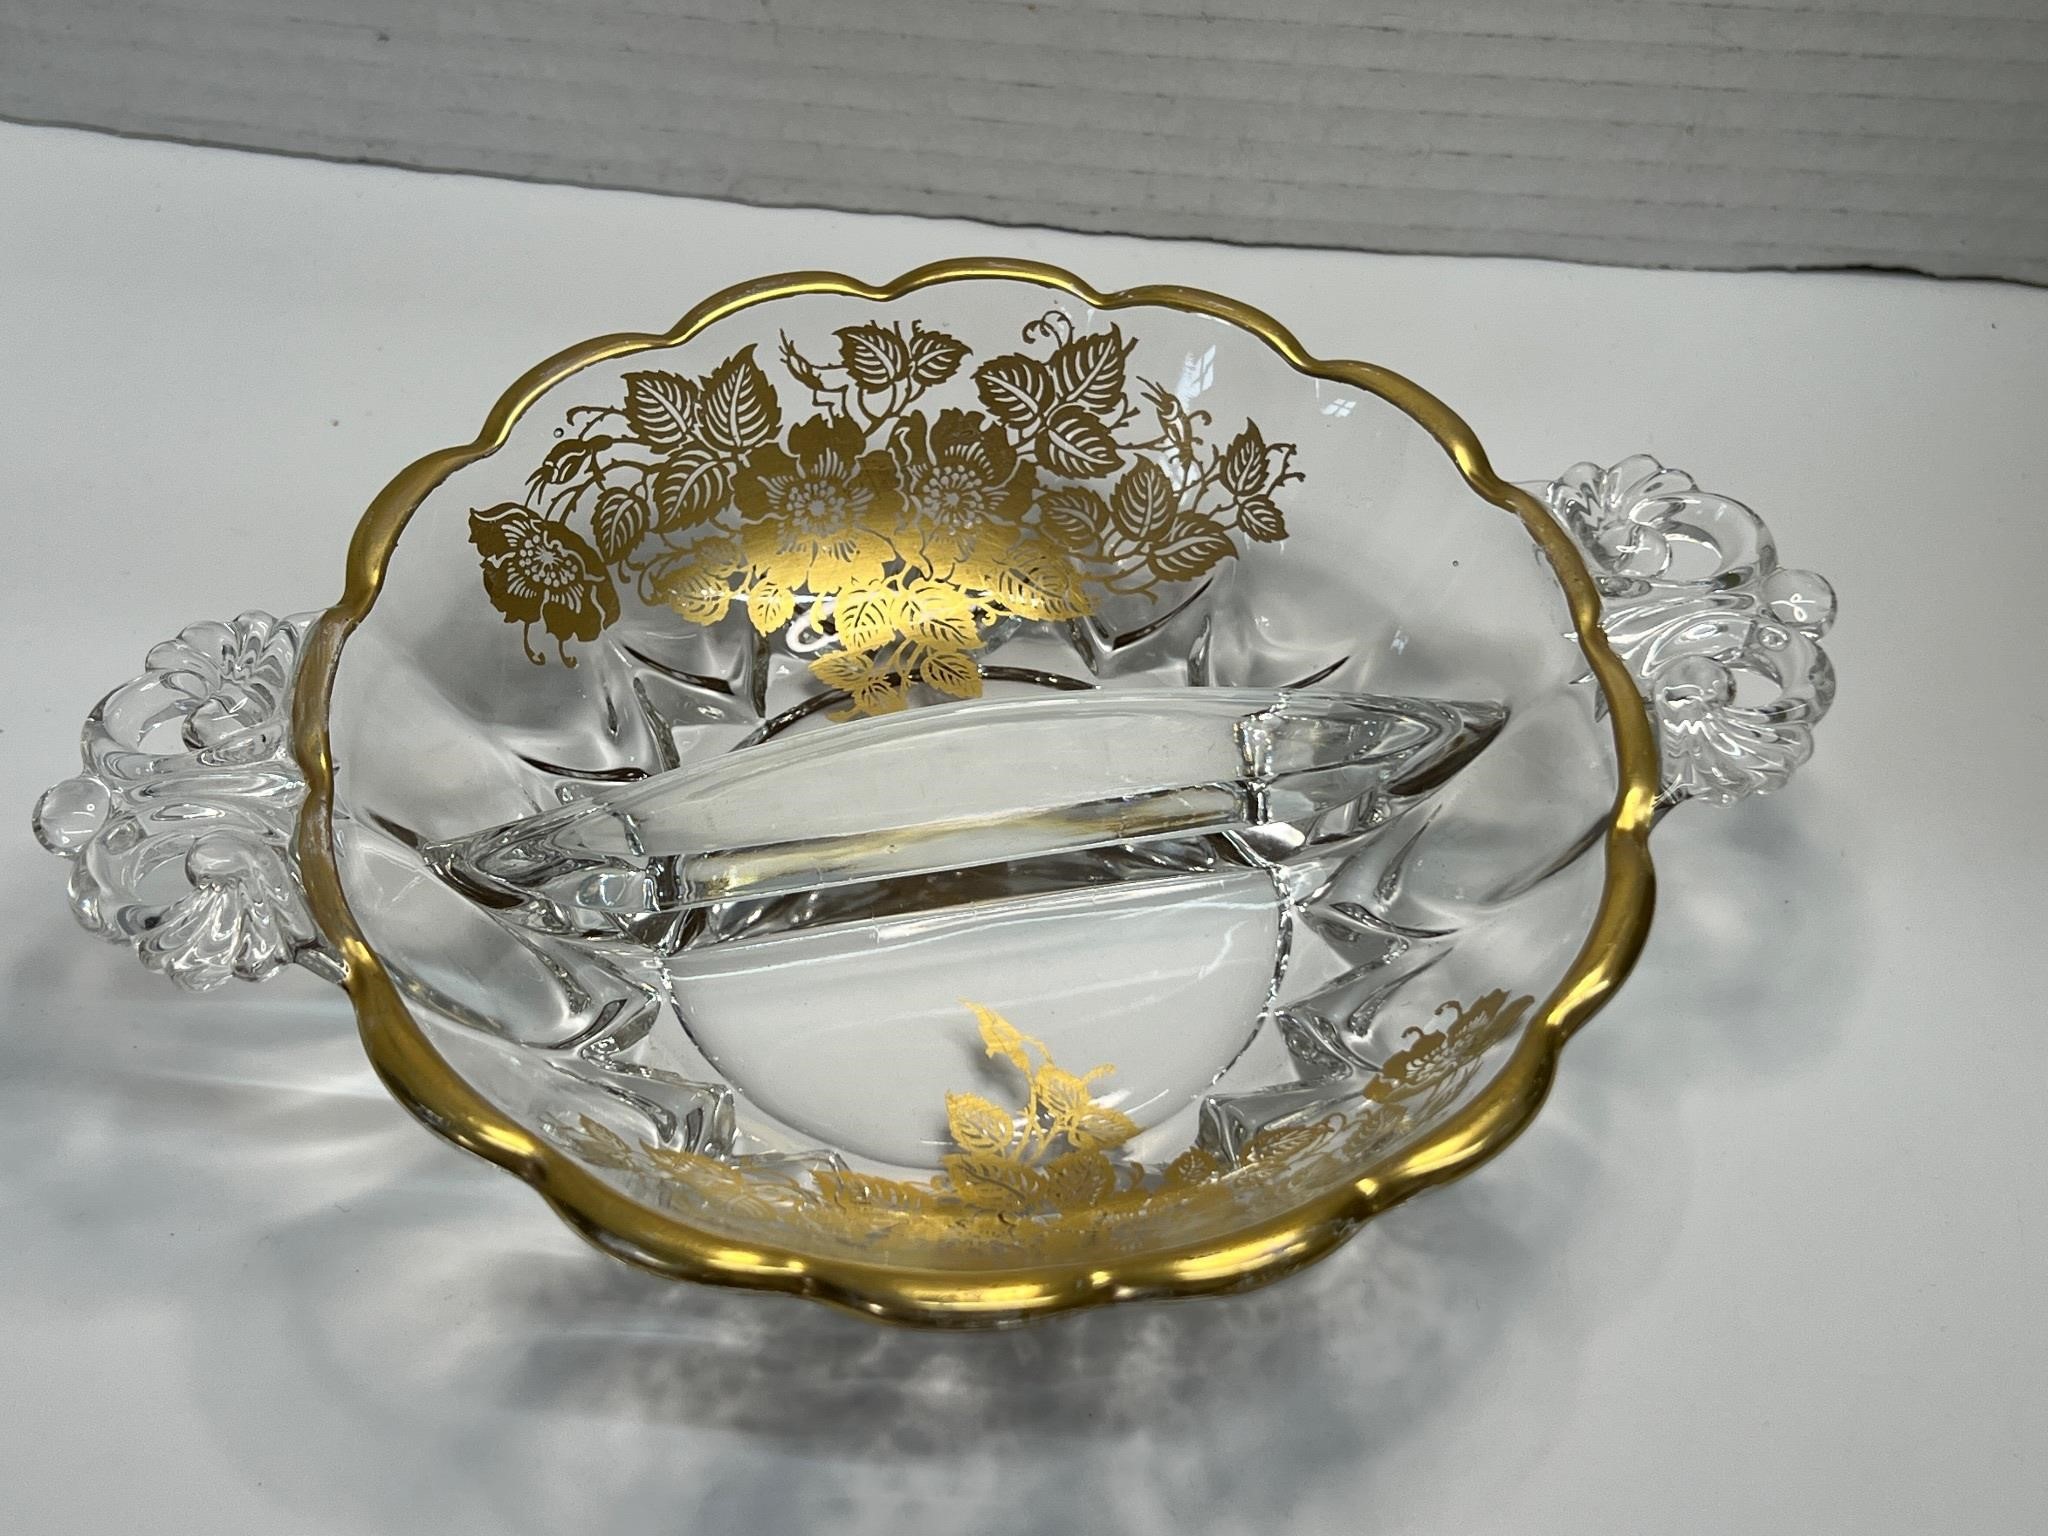 Divided Bowl with Gold Accents New Martinsville?